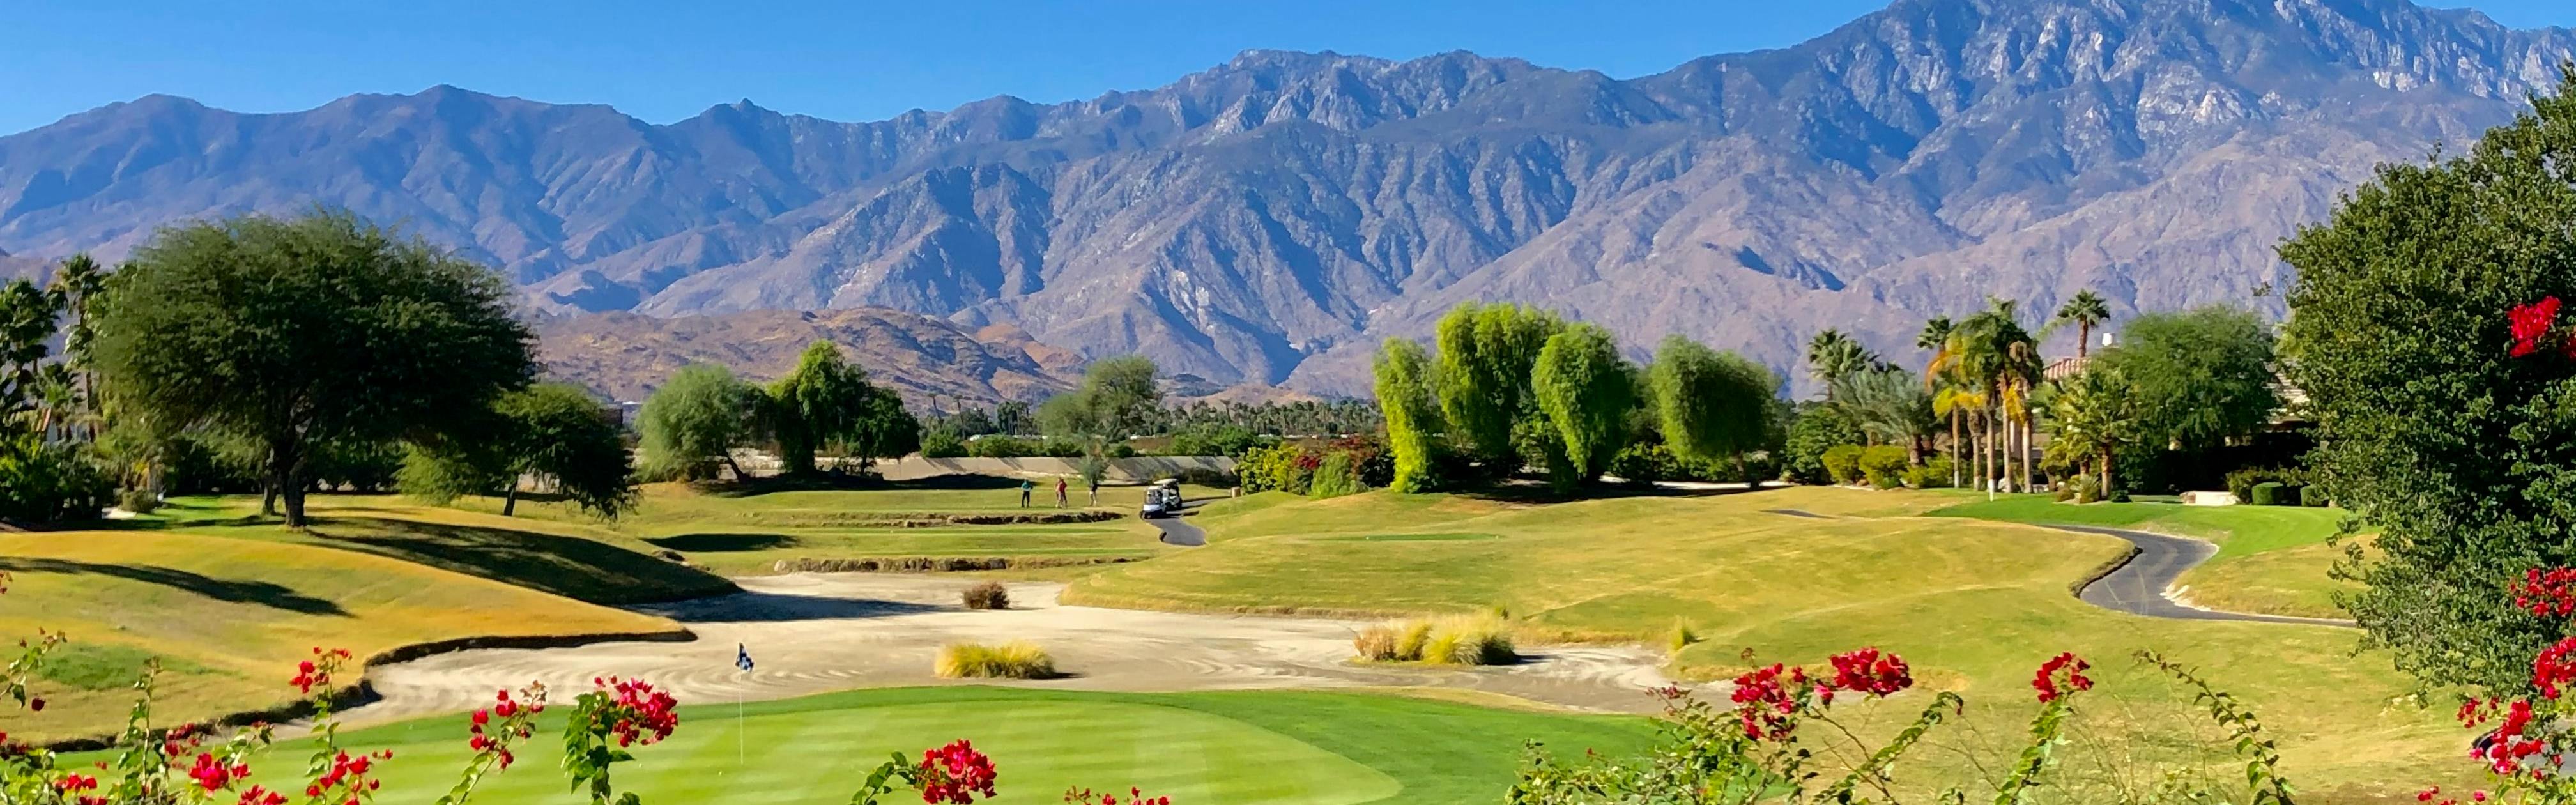 Red-pink flowers rise in the foreground and in the background, a golf course stretches out with rugged arid mountains in the distance.